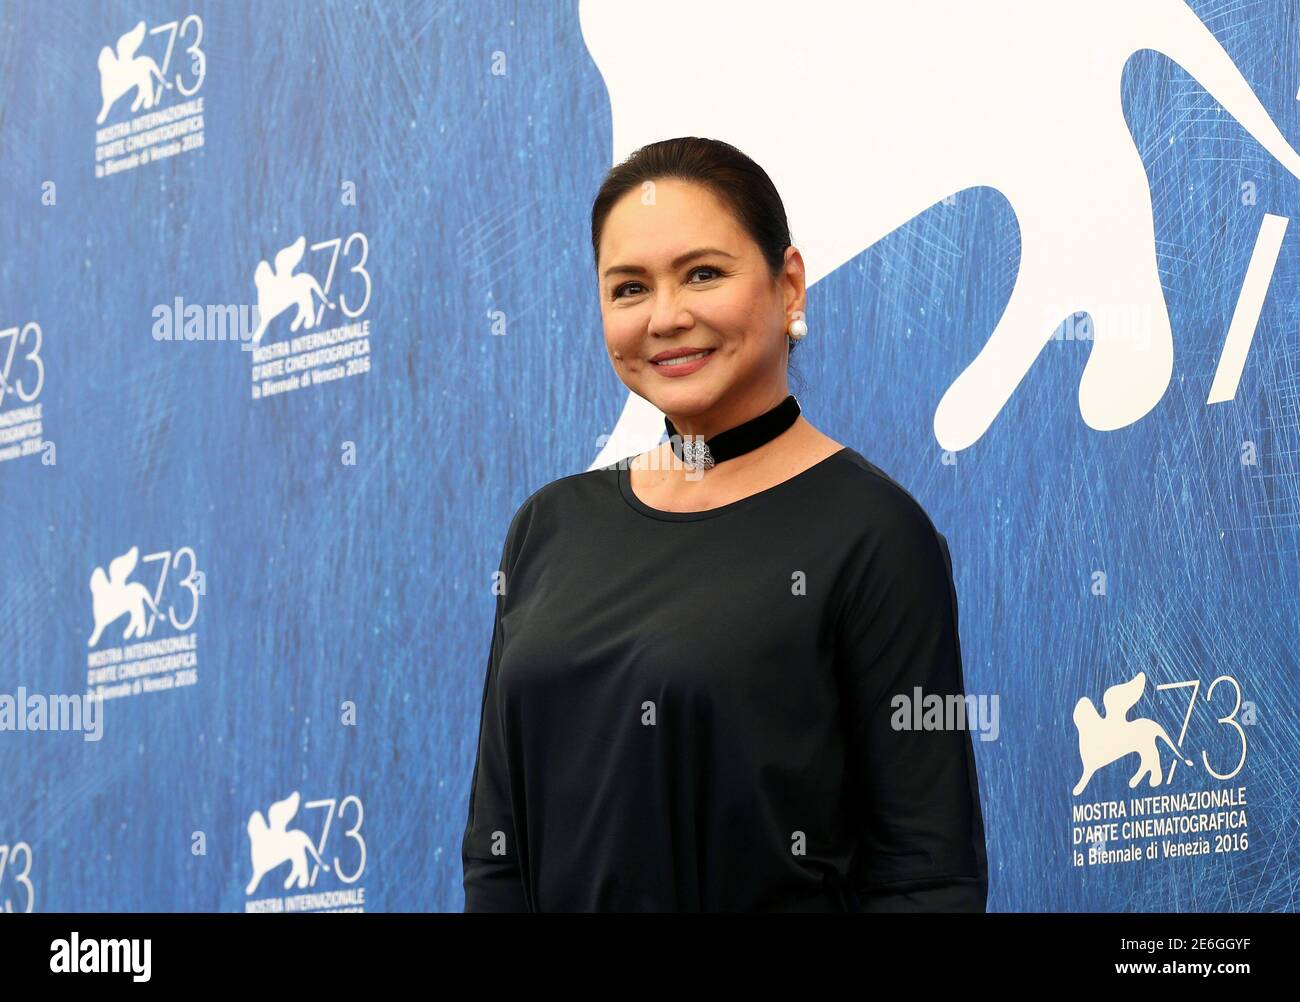 Actress Charo Santos-Concio attends the photo call for the movie 'Ang Babaeng Humayo' (The Woman Who Left) at the 73rd Venice Film Festival in Venice, Italy September 9, 2016. REUTERS/Alessandro Bianchi Stock Photo